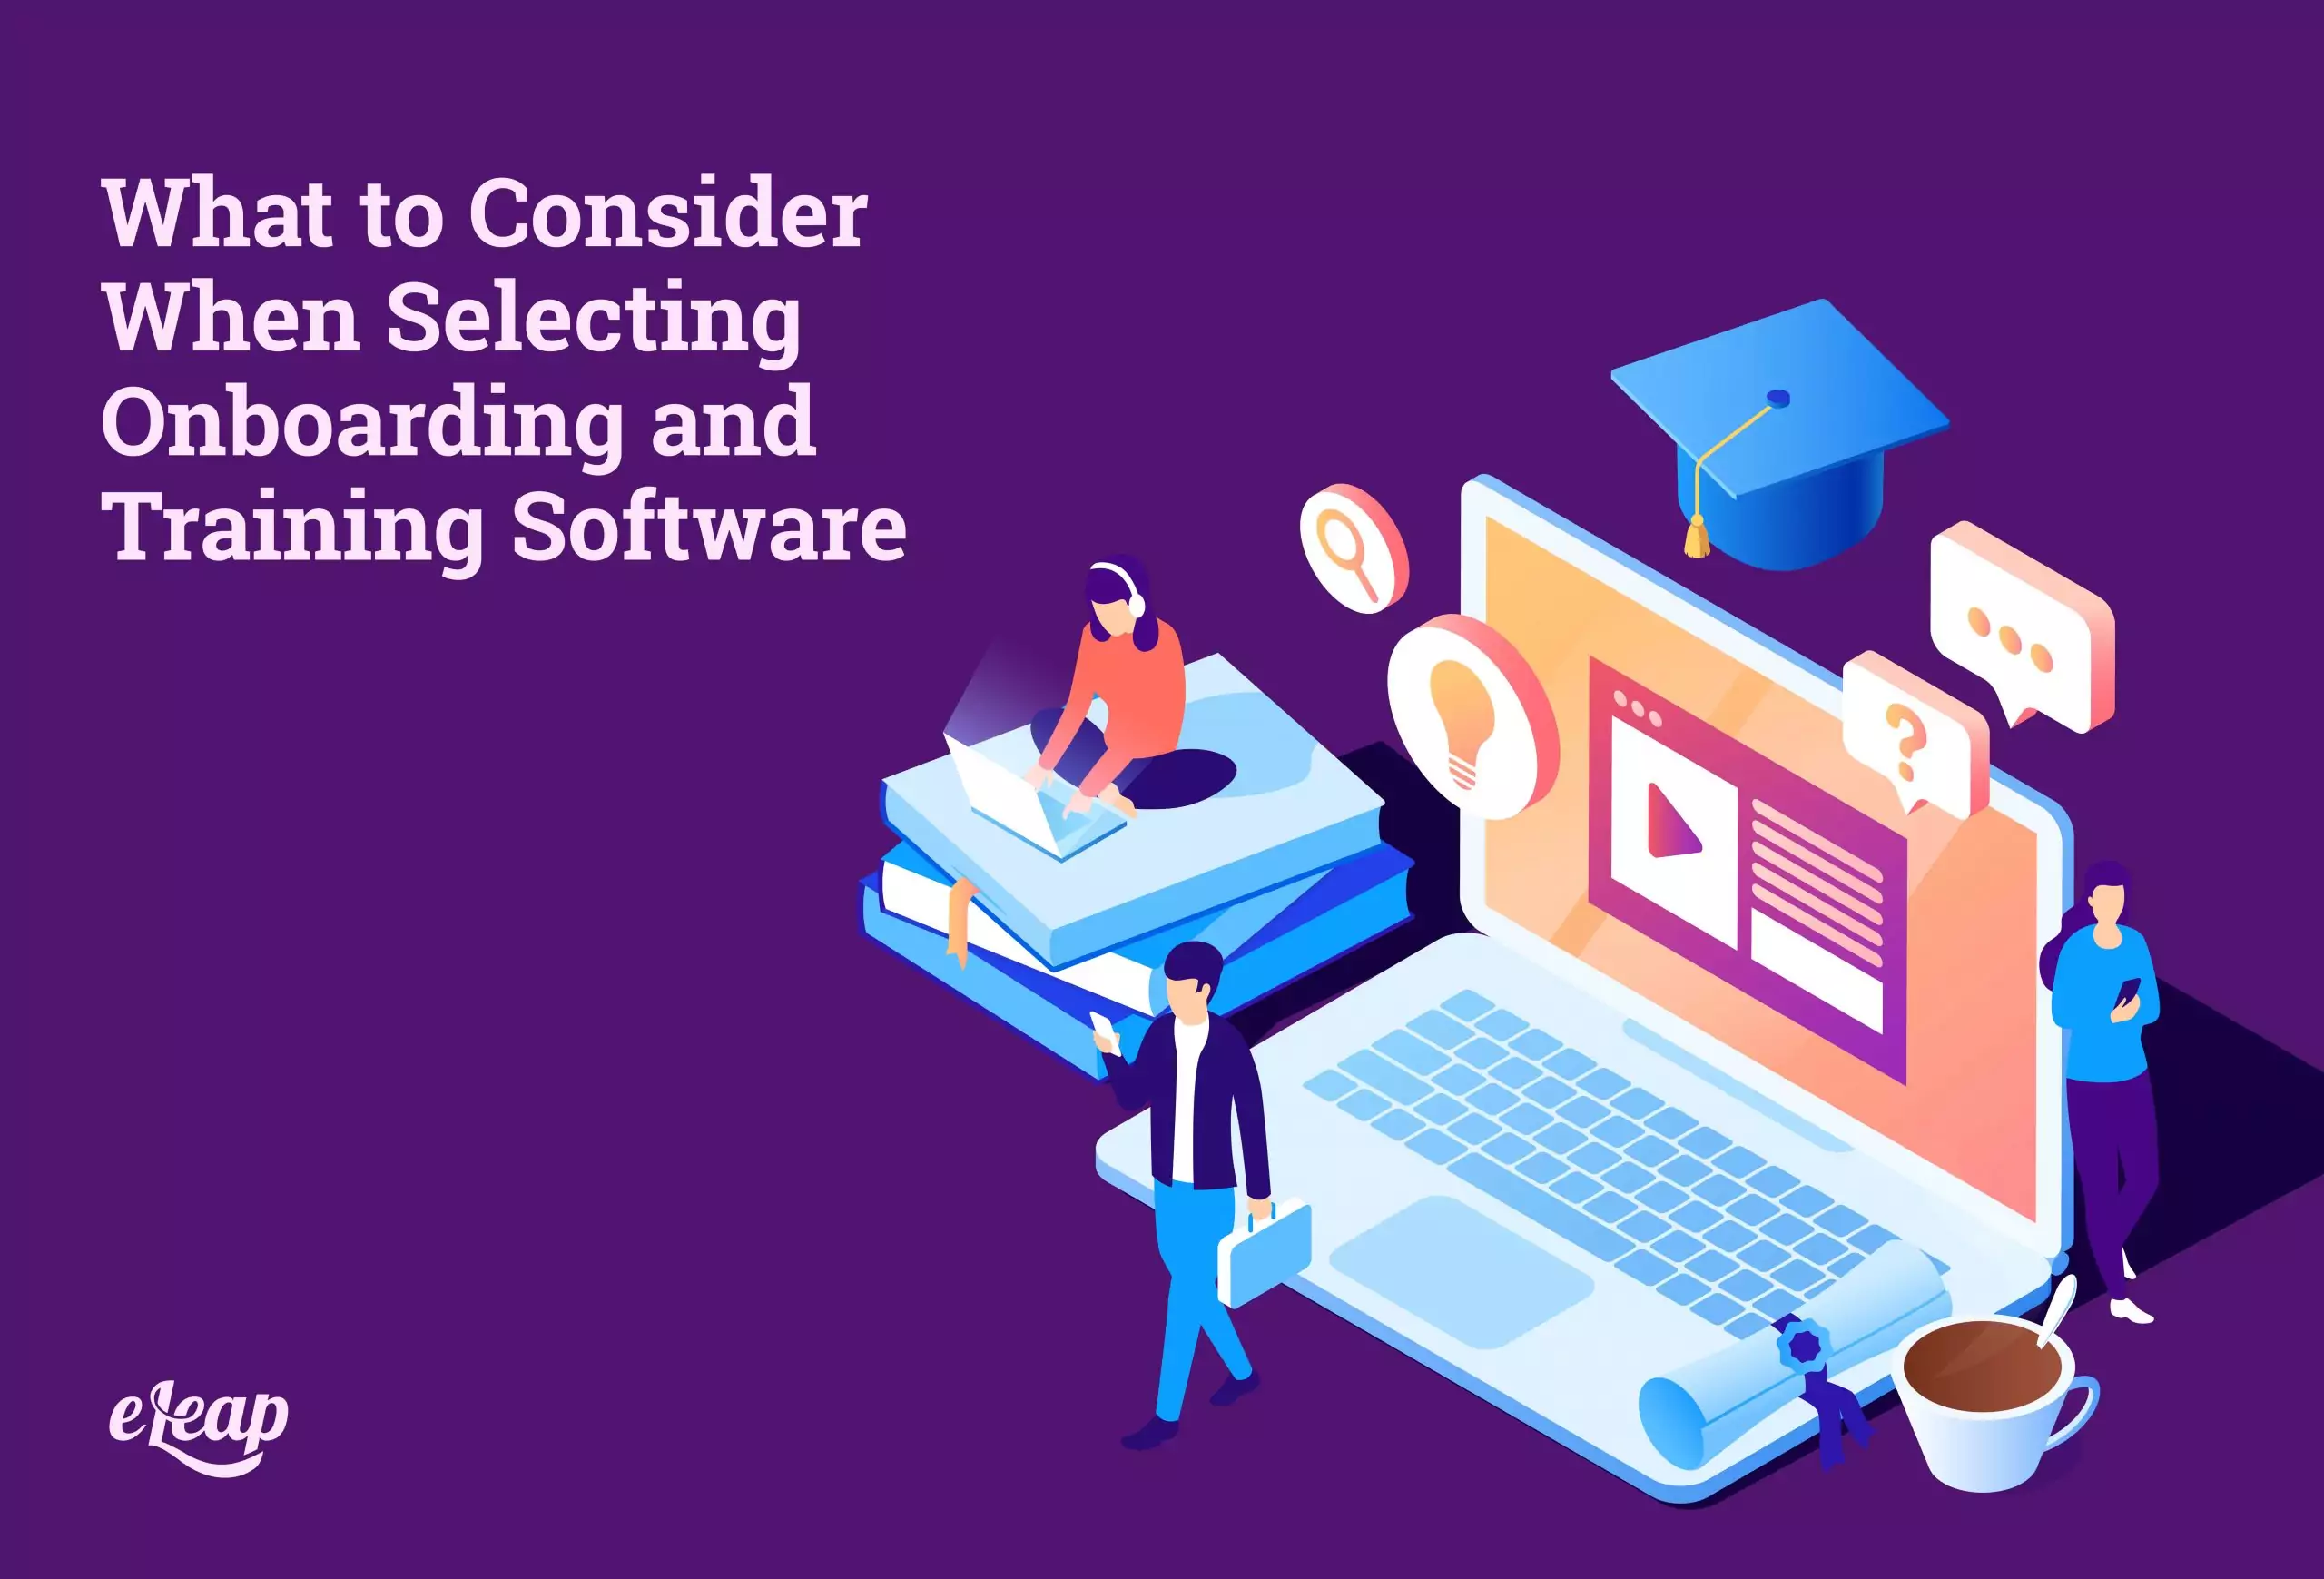 Selecting Onboarding and Training Software